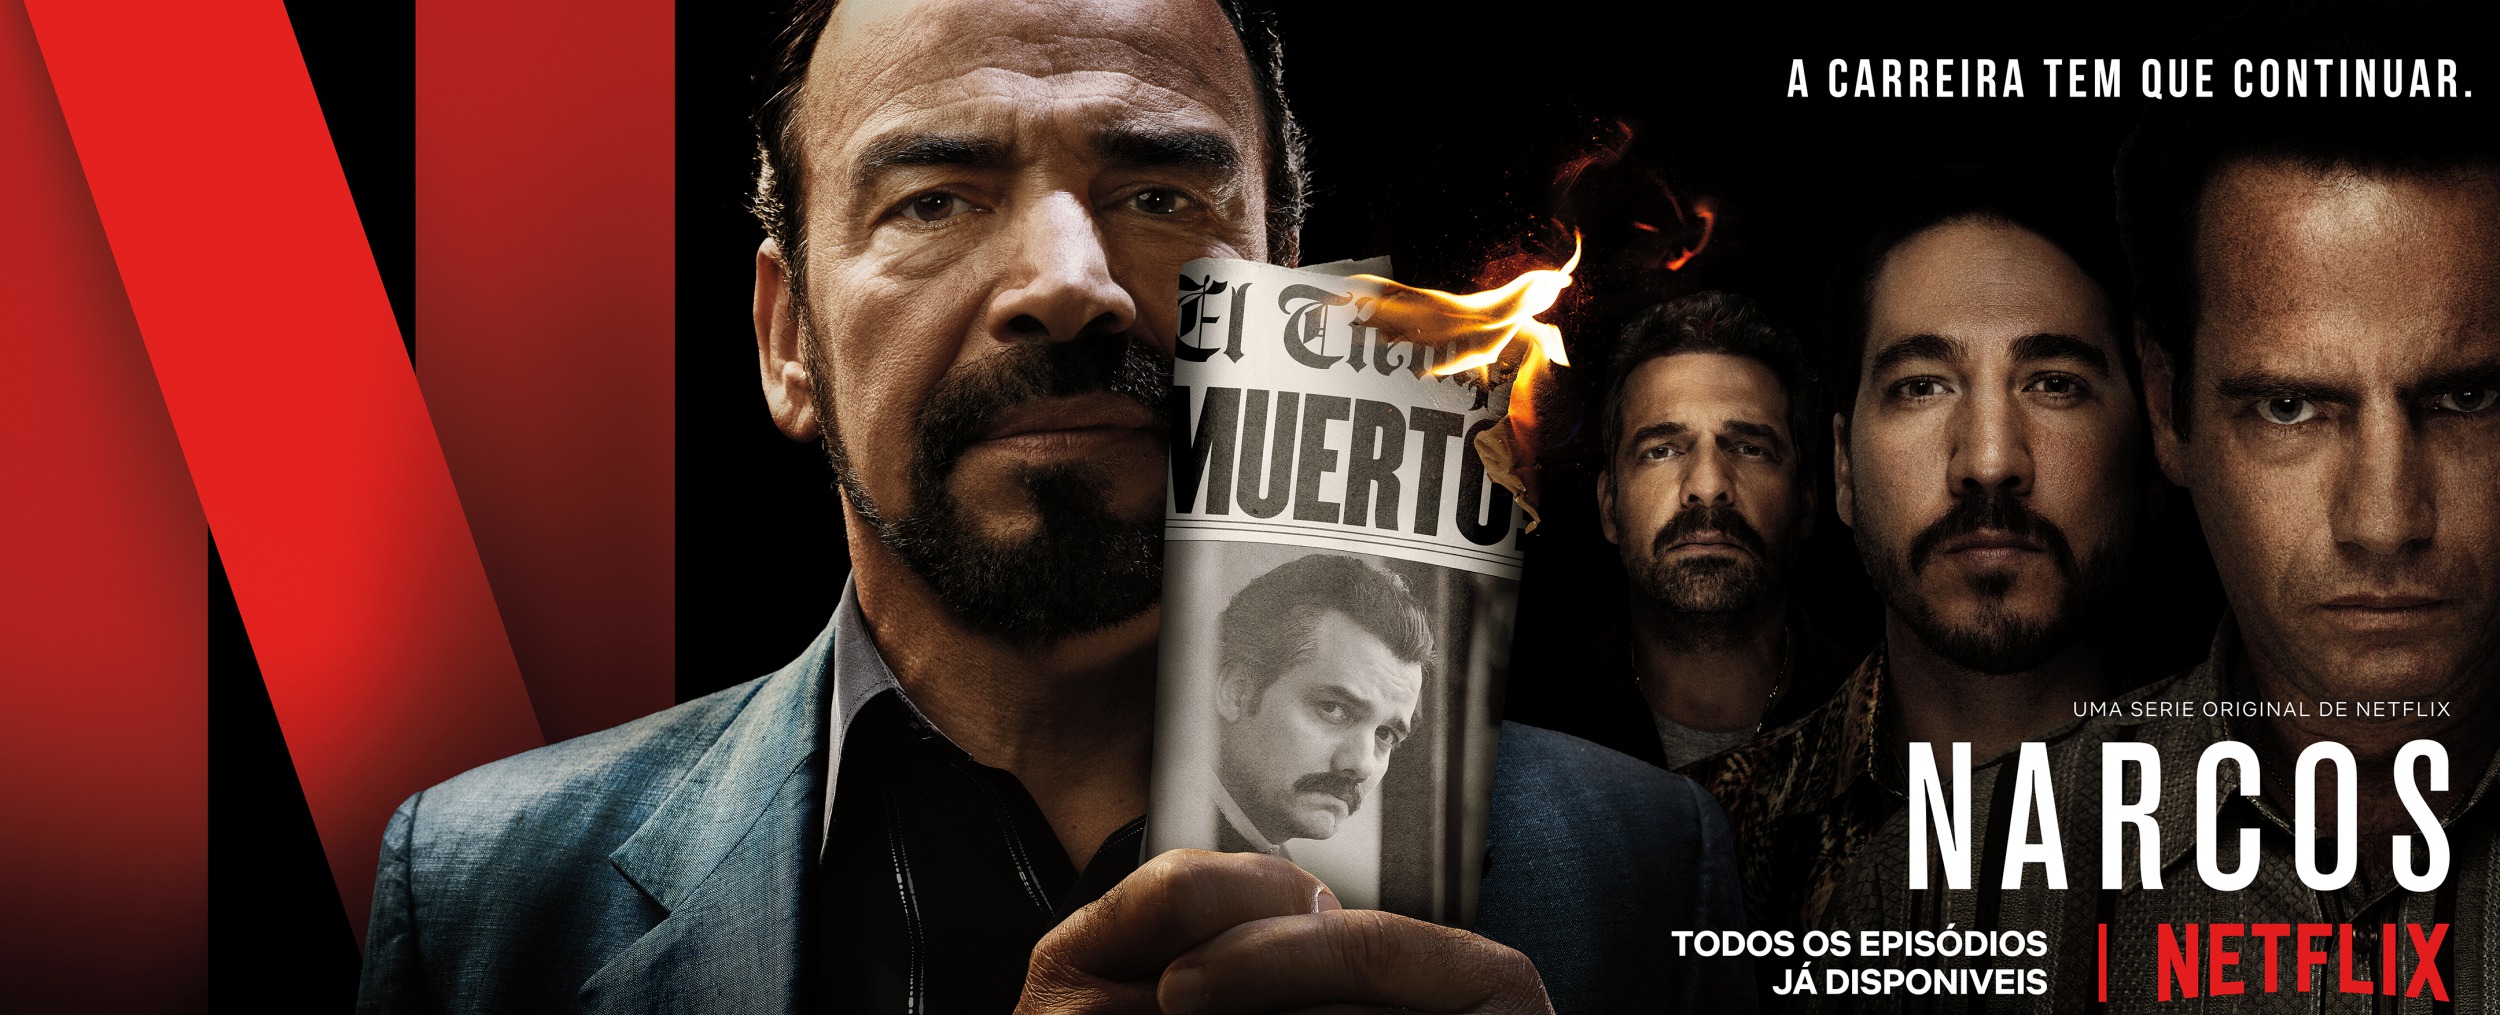 Mega Sized TV Poster Image for Narcos (#26 of 29)